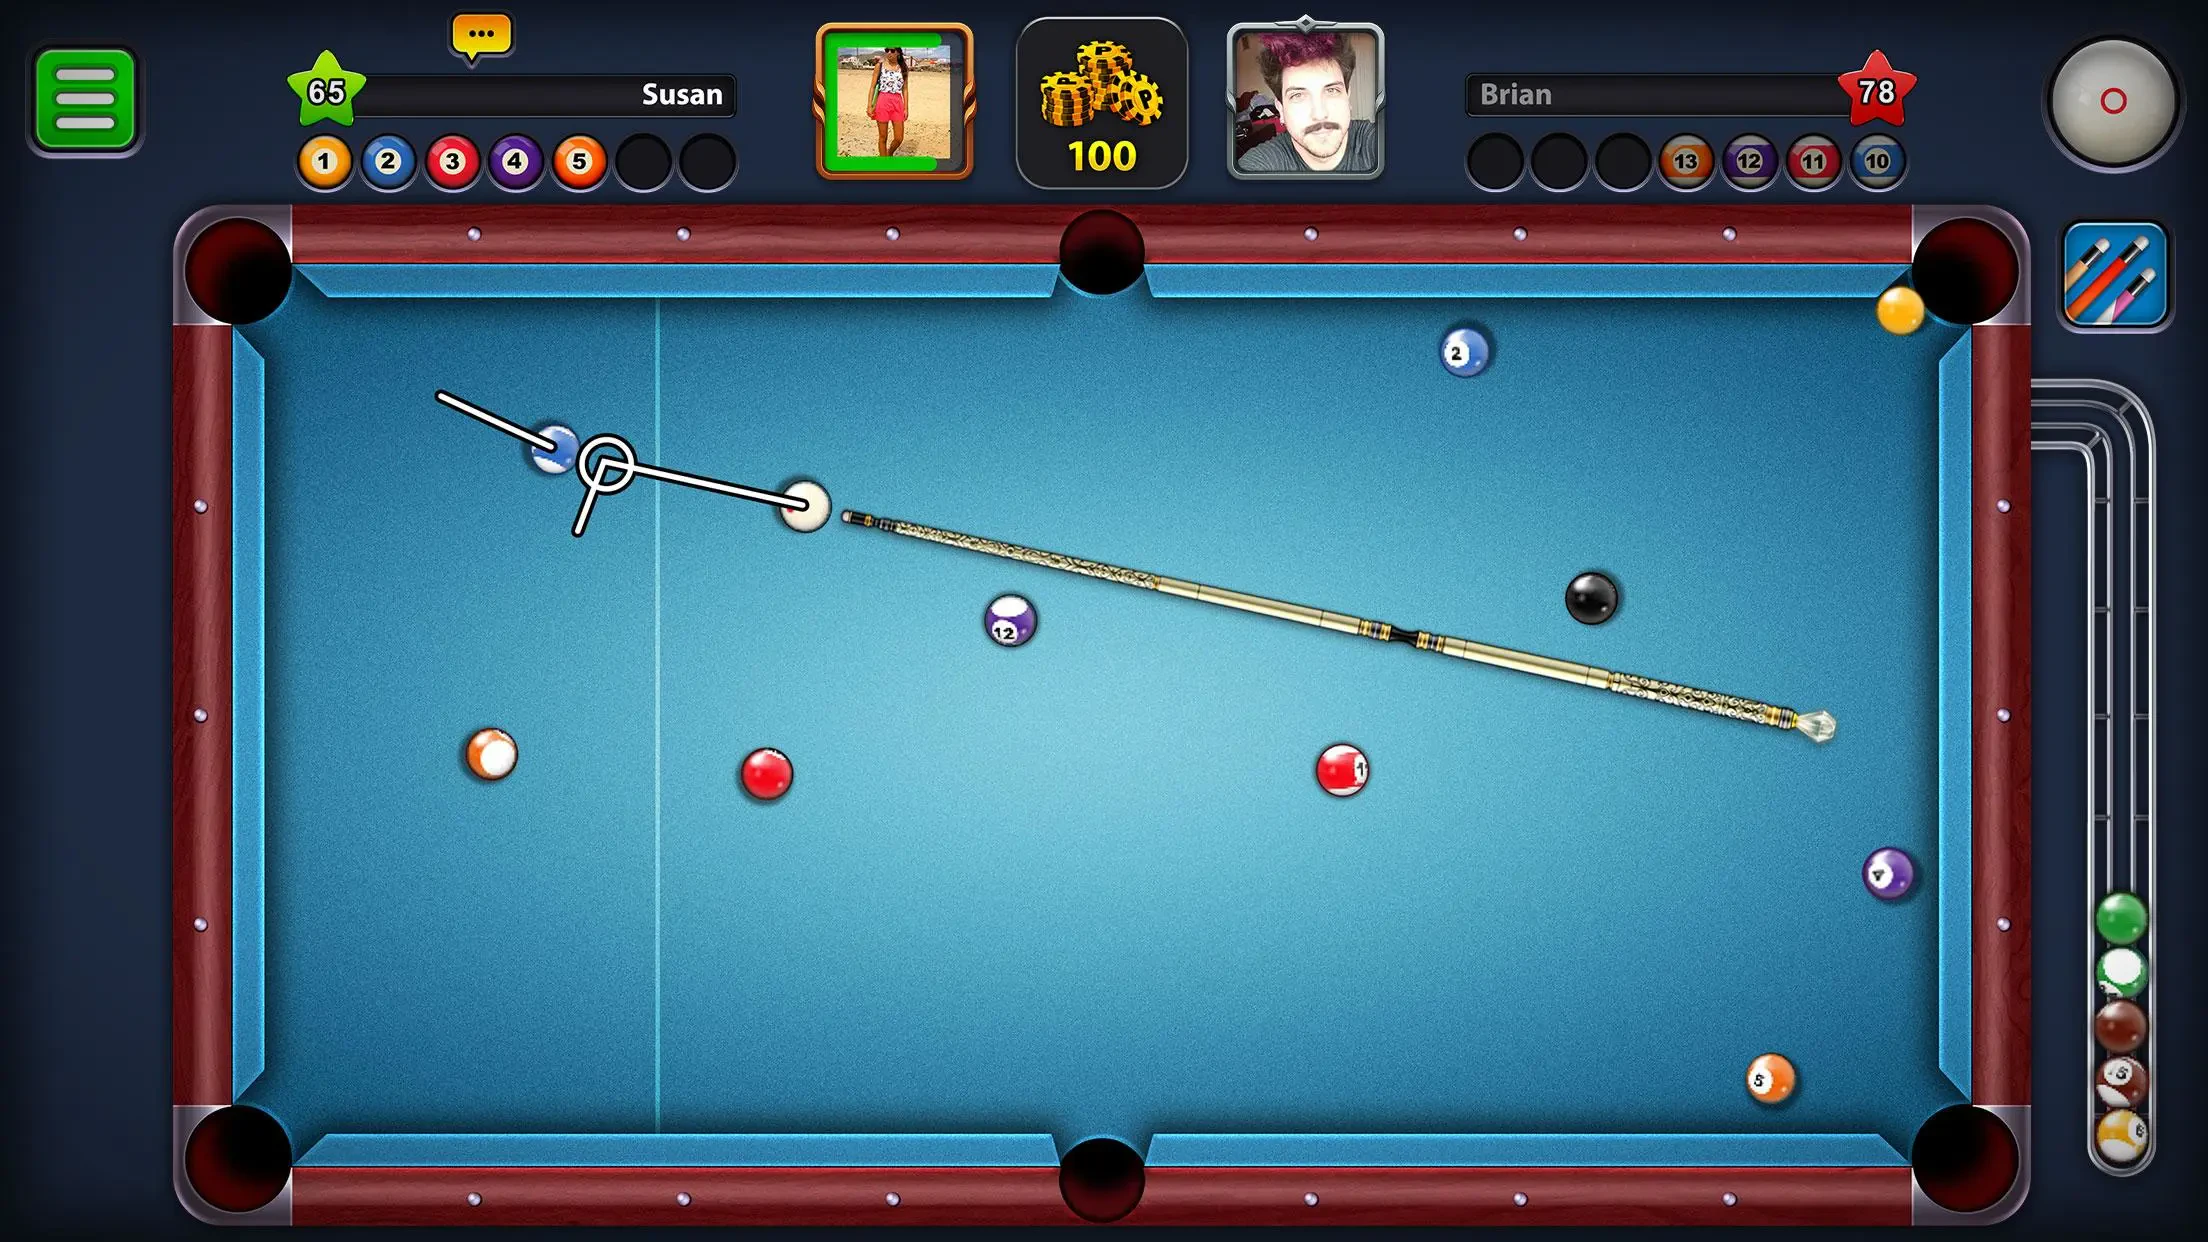 Games - New Video Game Releases 8 Ball Pool With Friends Test your